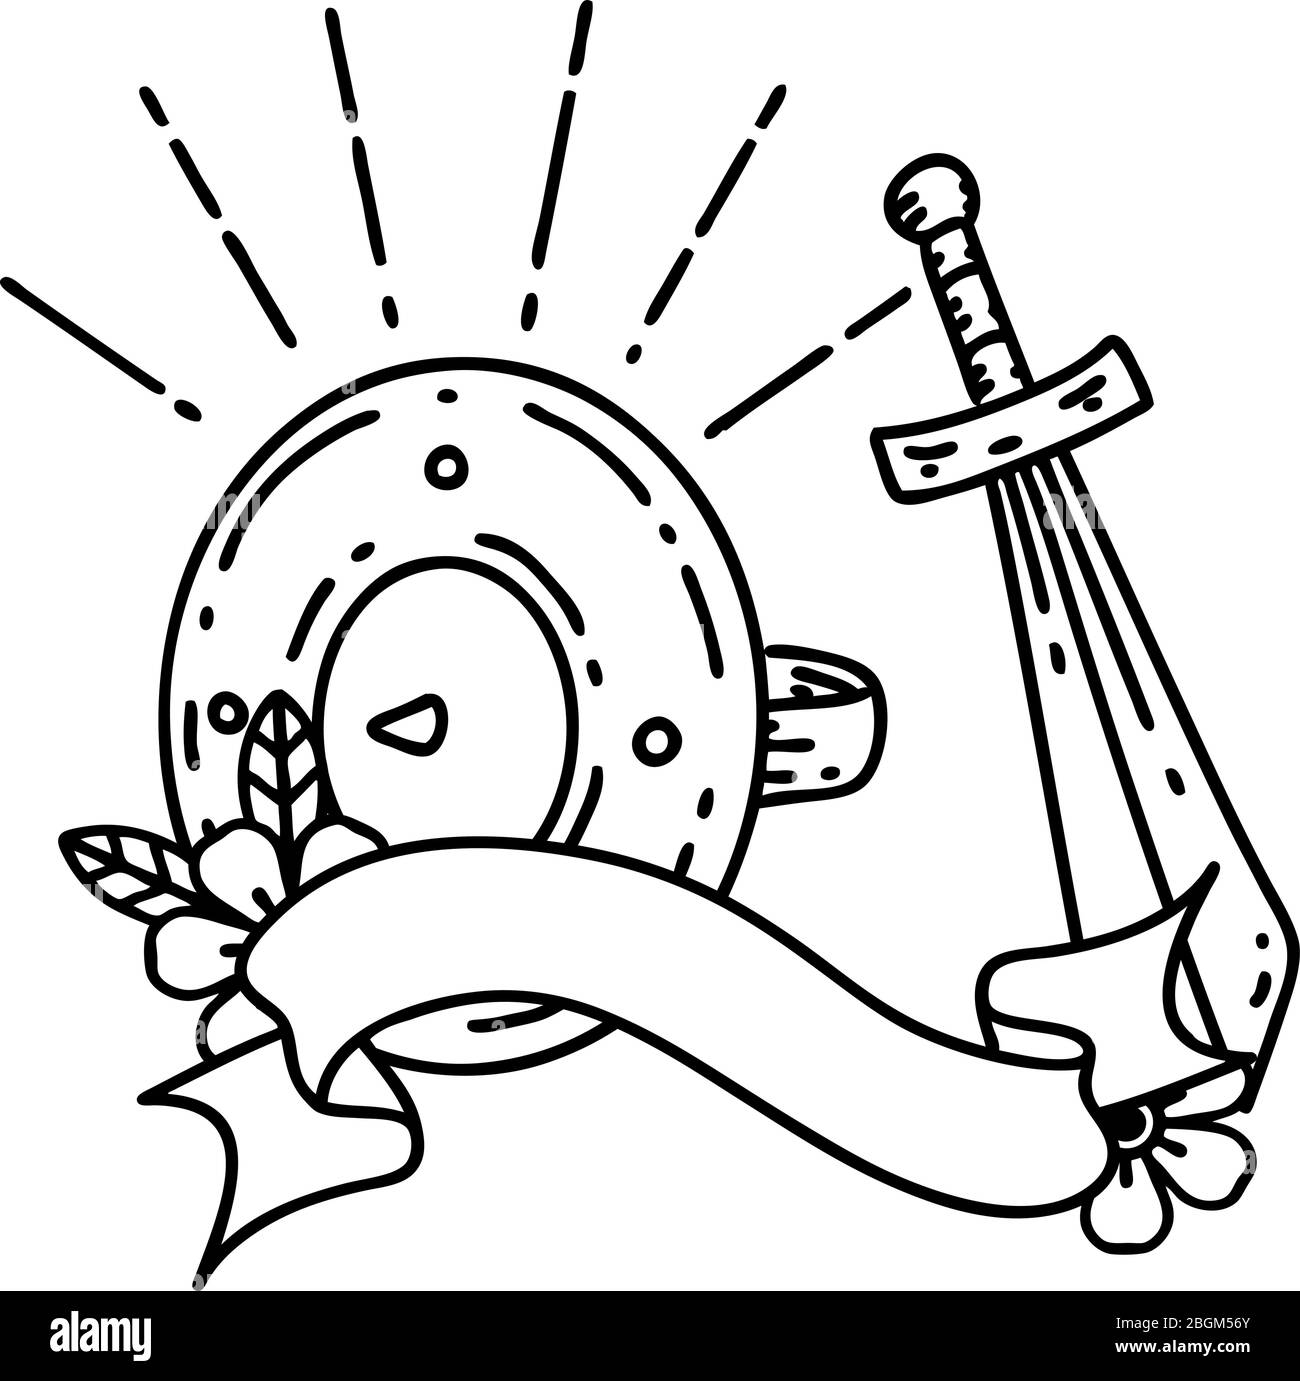 clipart shield and sword tattoo